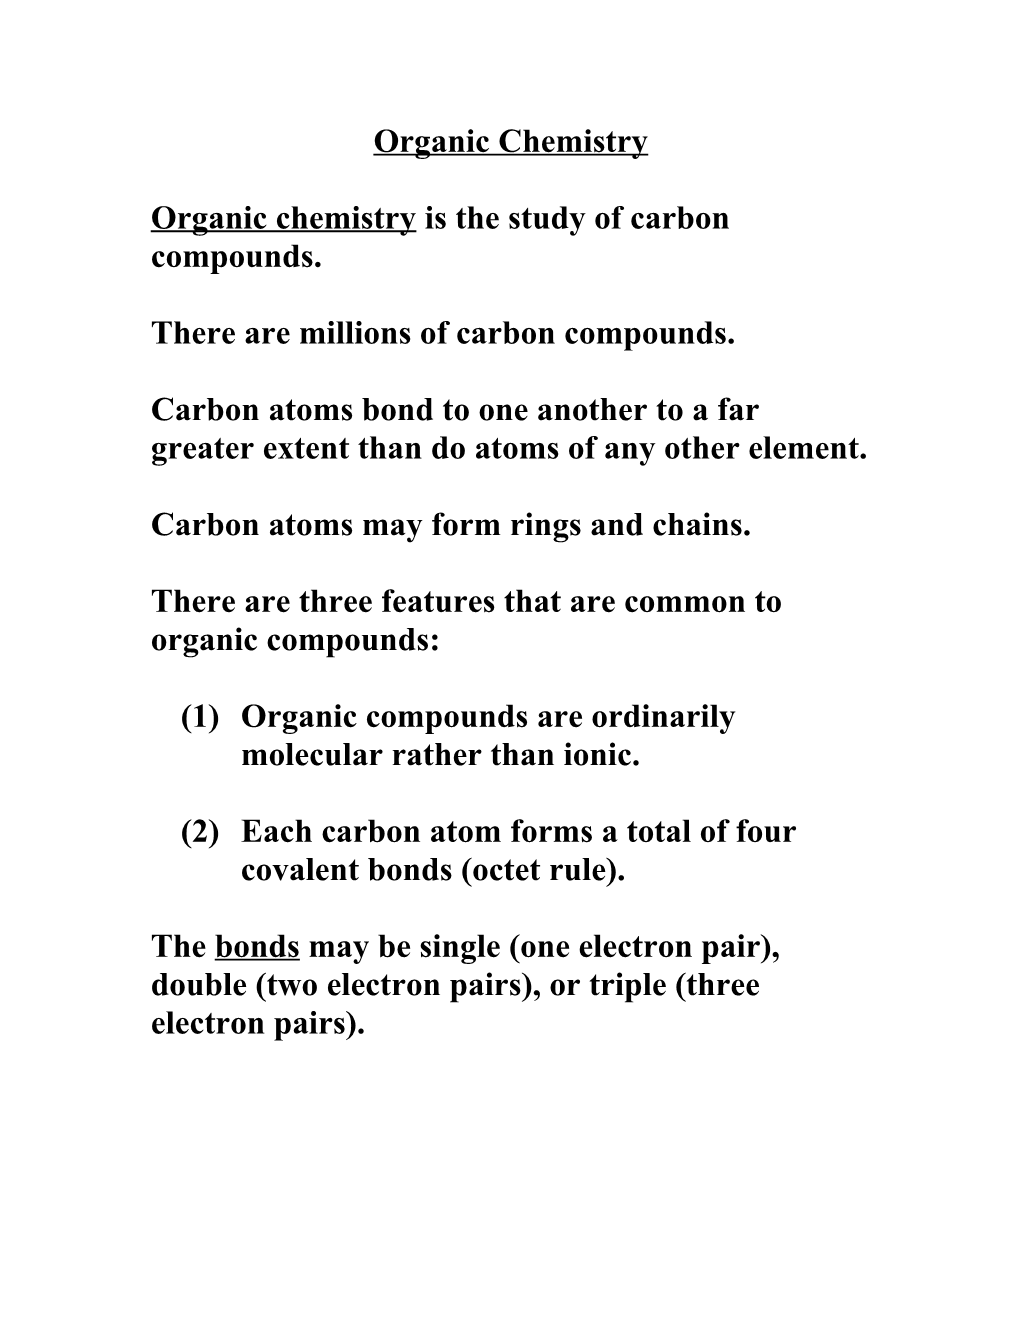 Organic Chemistry Is the Study of Carbon Compounds